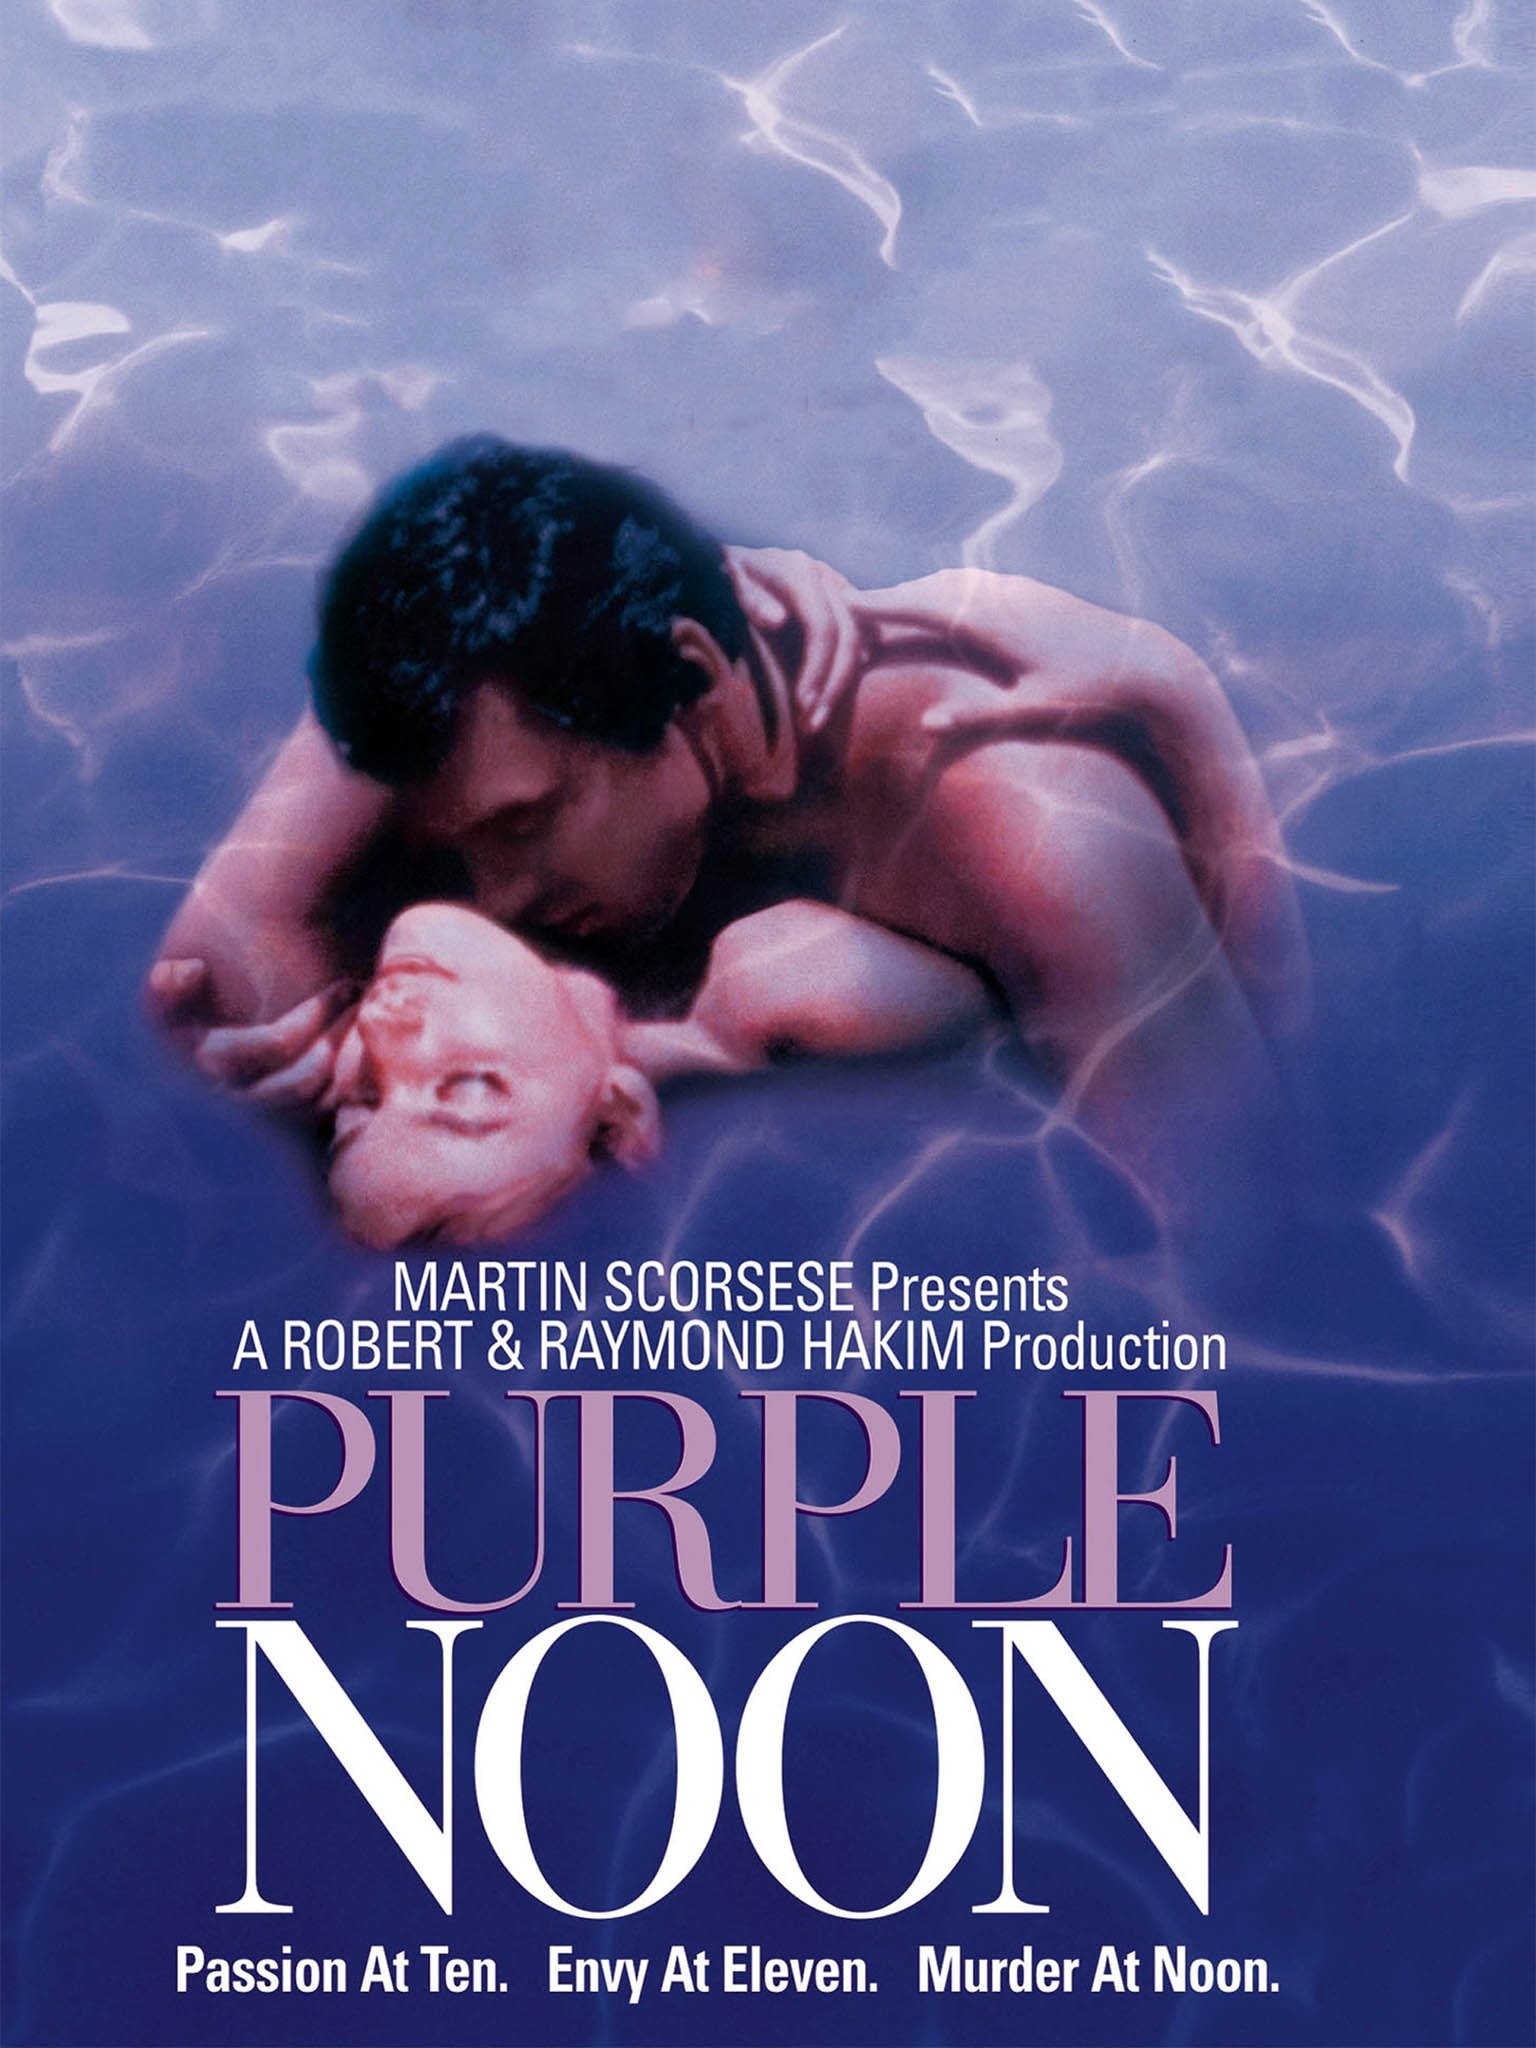 Vintage Plein Soleil / Purple Noon French Movie Poster Available